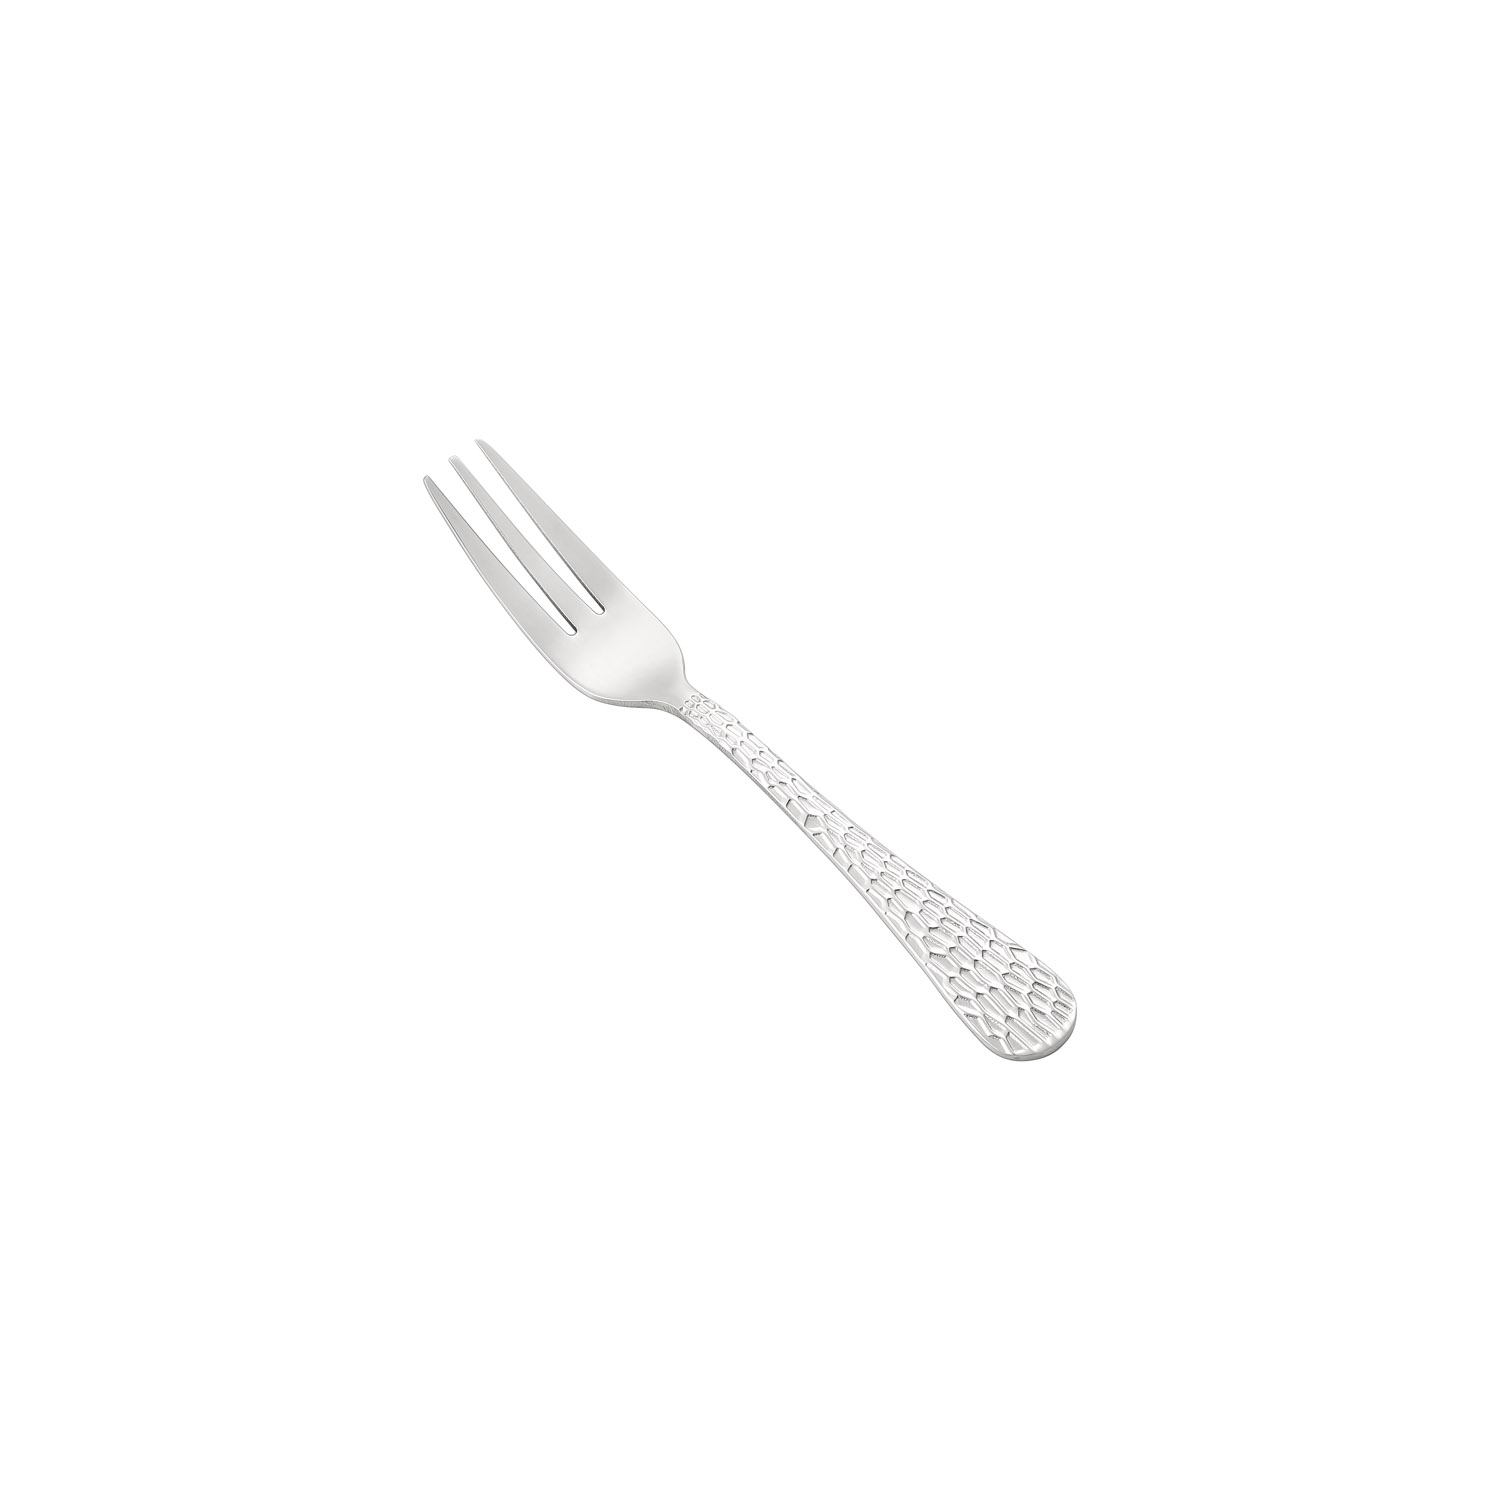 CAC China 3015-07 Celtic Oyster Fork, Heavyweight 18/0, 5-3/4"